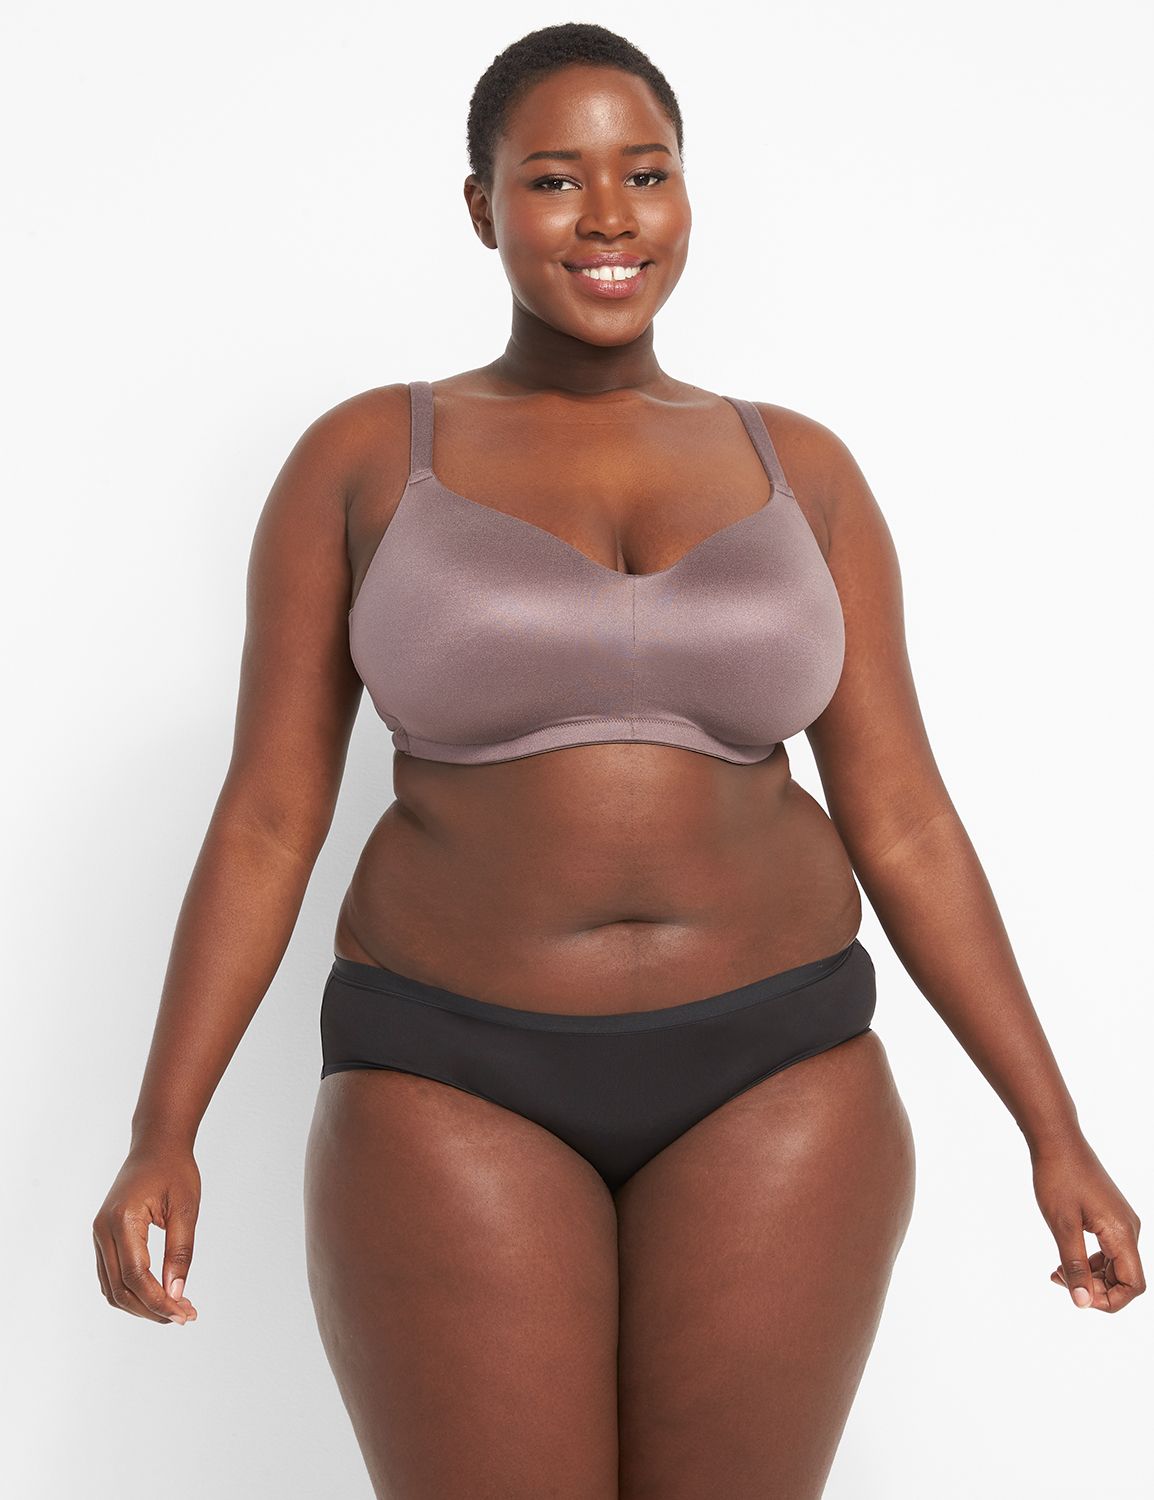 Wide Band Matectomy Bra by Almost U